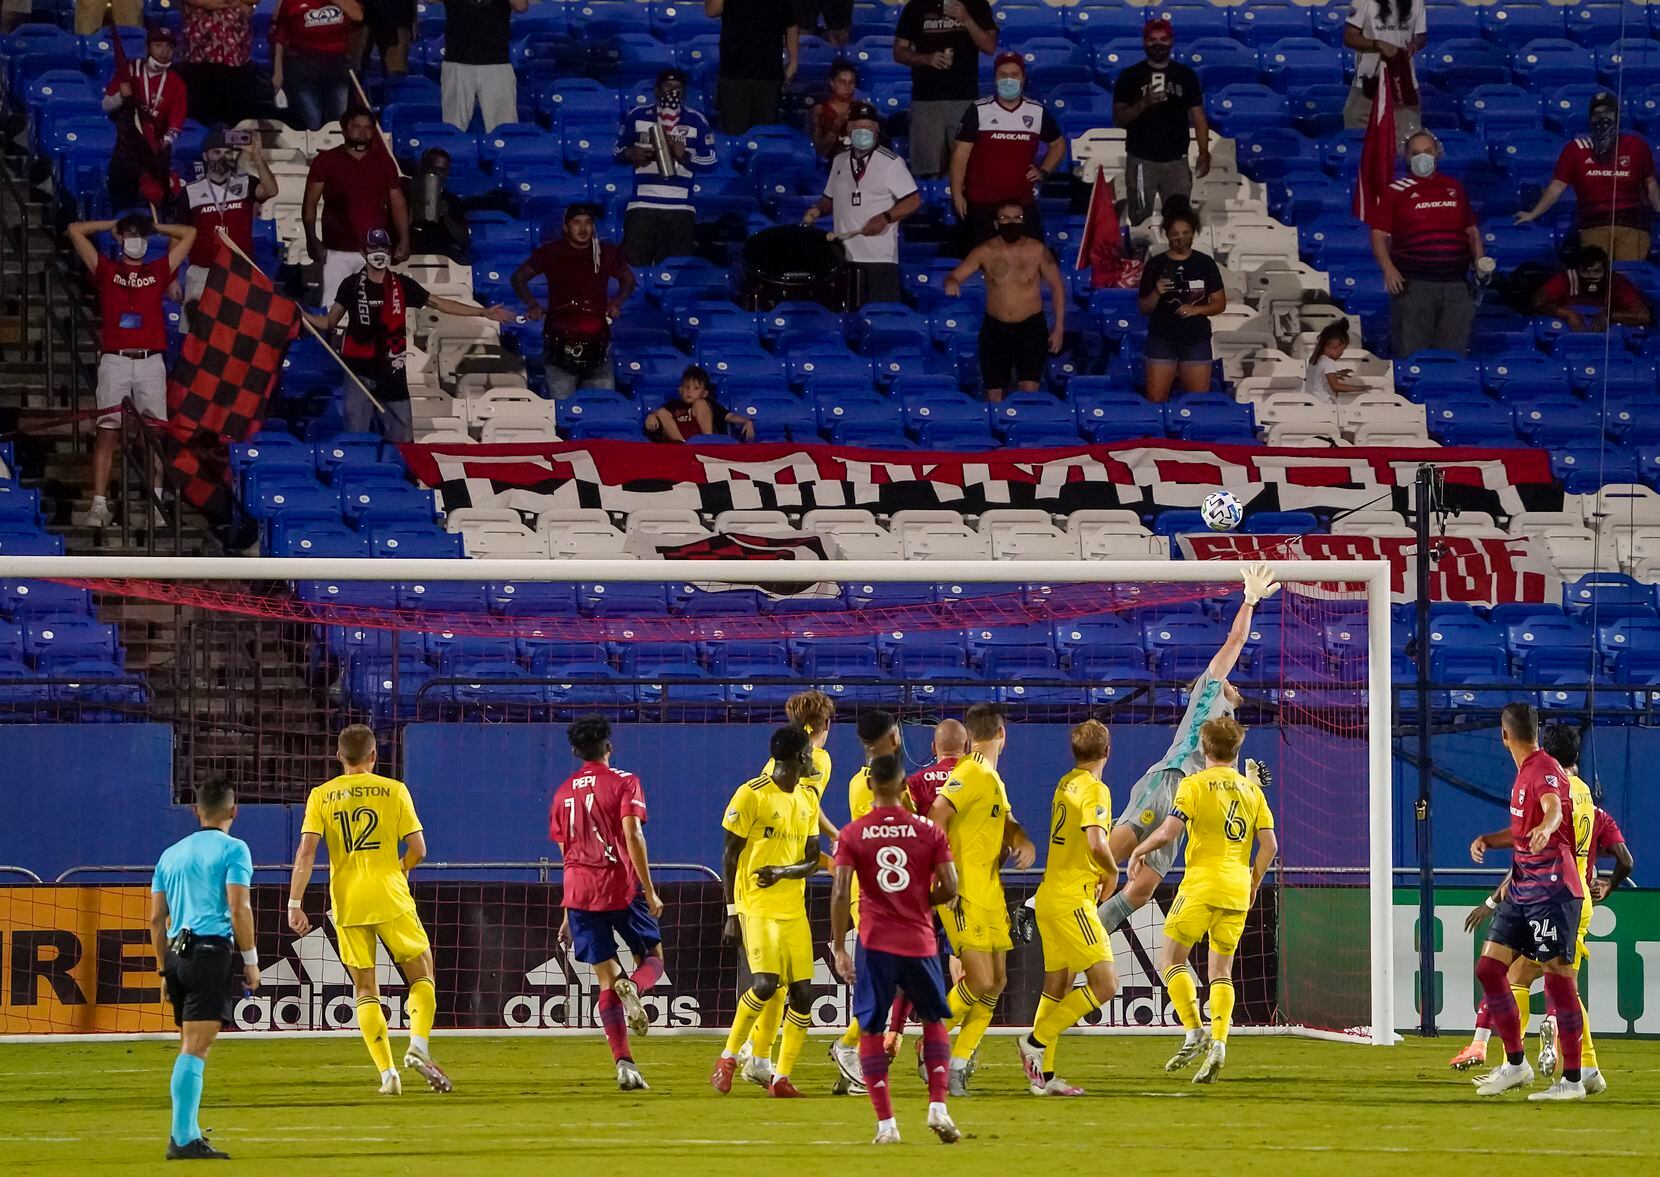 Socially distant FC Dallas supporters watch as a free kick by FC Dallas midfielder Bryan Acosta (8) sails over the bar, and Nashville SC goalkeeper Joe Willis, on the final play in added time of an MLS soccer game at Toyota Stadium on Wednesday, Aug. 12, 2020, in Frisco, Texas. Nashville SC won the game 1-0. (Smiley N. Pool/The Dallas Morning News)